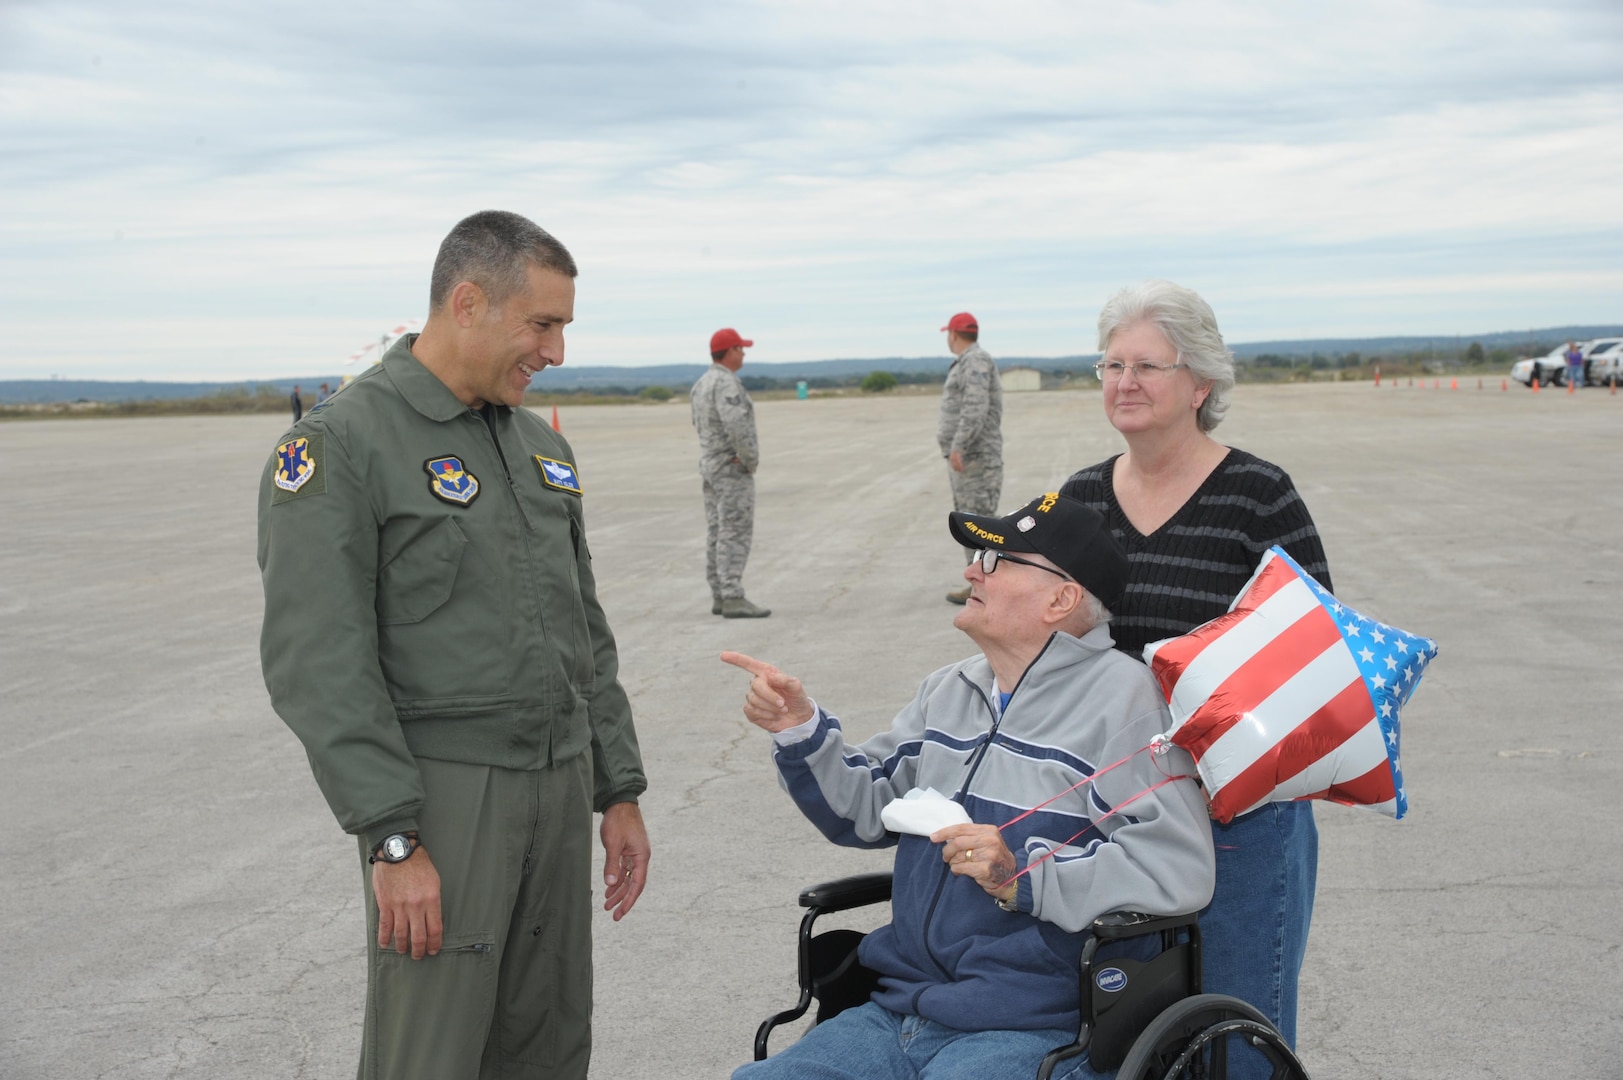 Col. Matthew Isler, 12th Flying Training Wing, commander, greets Chaplain Lt. Col. Ret. Kenyon Hutchenson and Cindy Rogers, during the Joint Base San Antonio Seguin Auxiliary Airfield Open House, Nov. 13, 2015. JBSA-Randolph Auxiliary Airfield is used solely by the 560th Flying Training Squadron for preparing instructors for undergraduate pilot training T-38 training assignments.  The 560th primarily uses Seguin Auxfield for practice landings in a pilot controlled pattern called instead of FAA controllers. (U.S. Air Force photo by Joel Martinez/Released) 